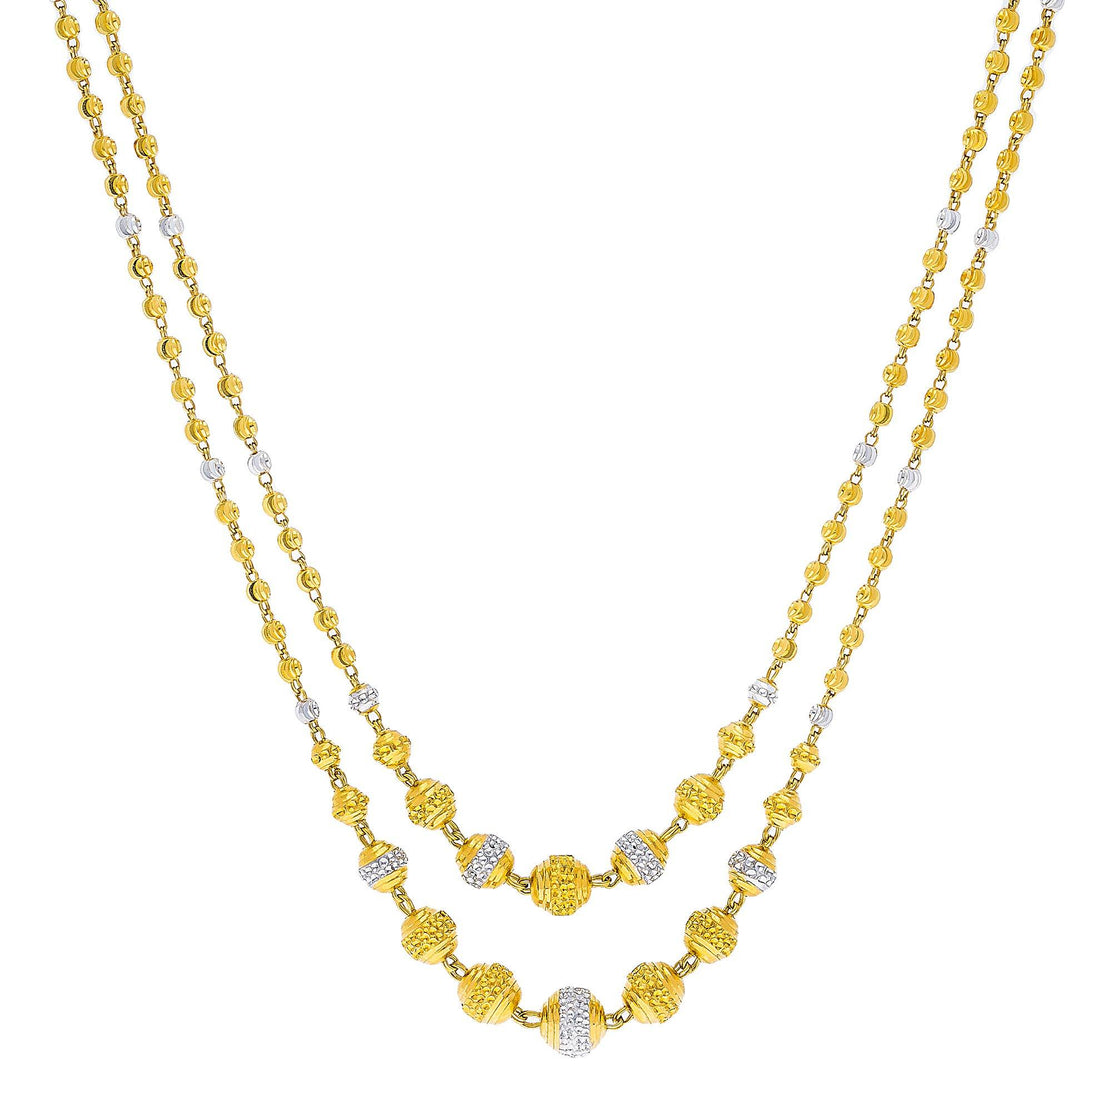 Multi Tone 22K Gold Layered Necklace - Perfect For Any Event!